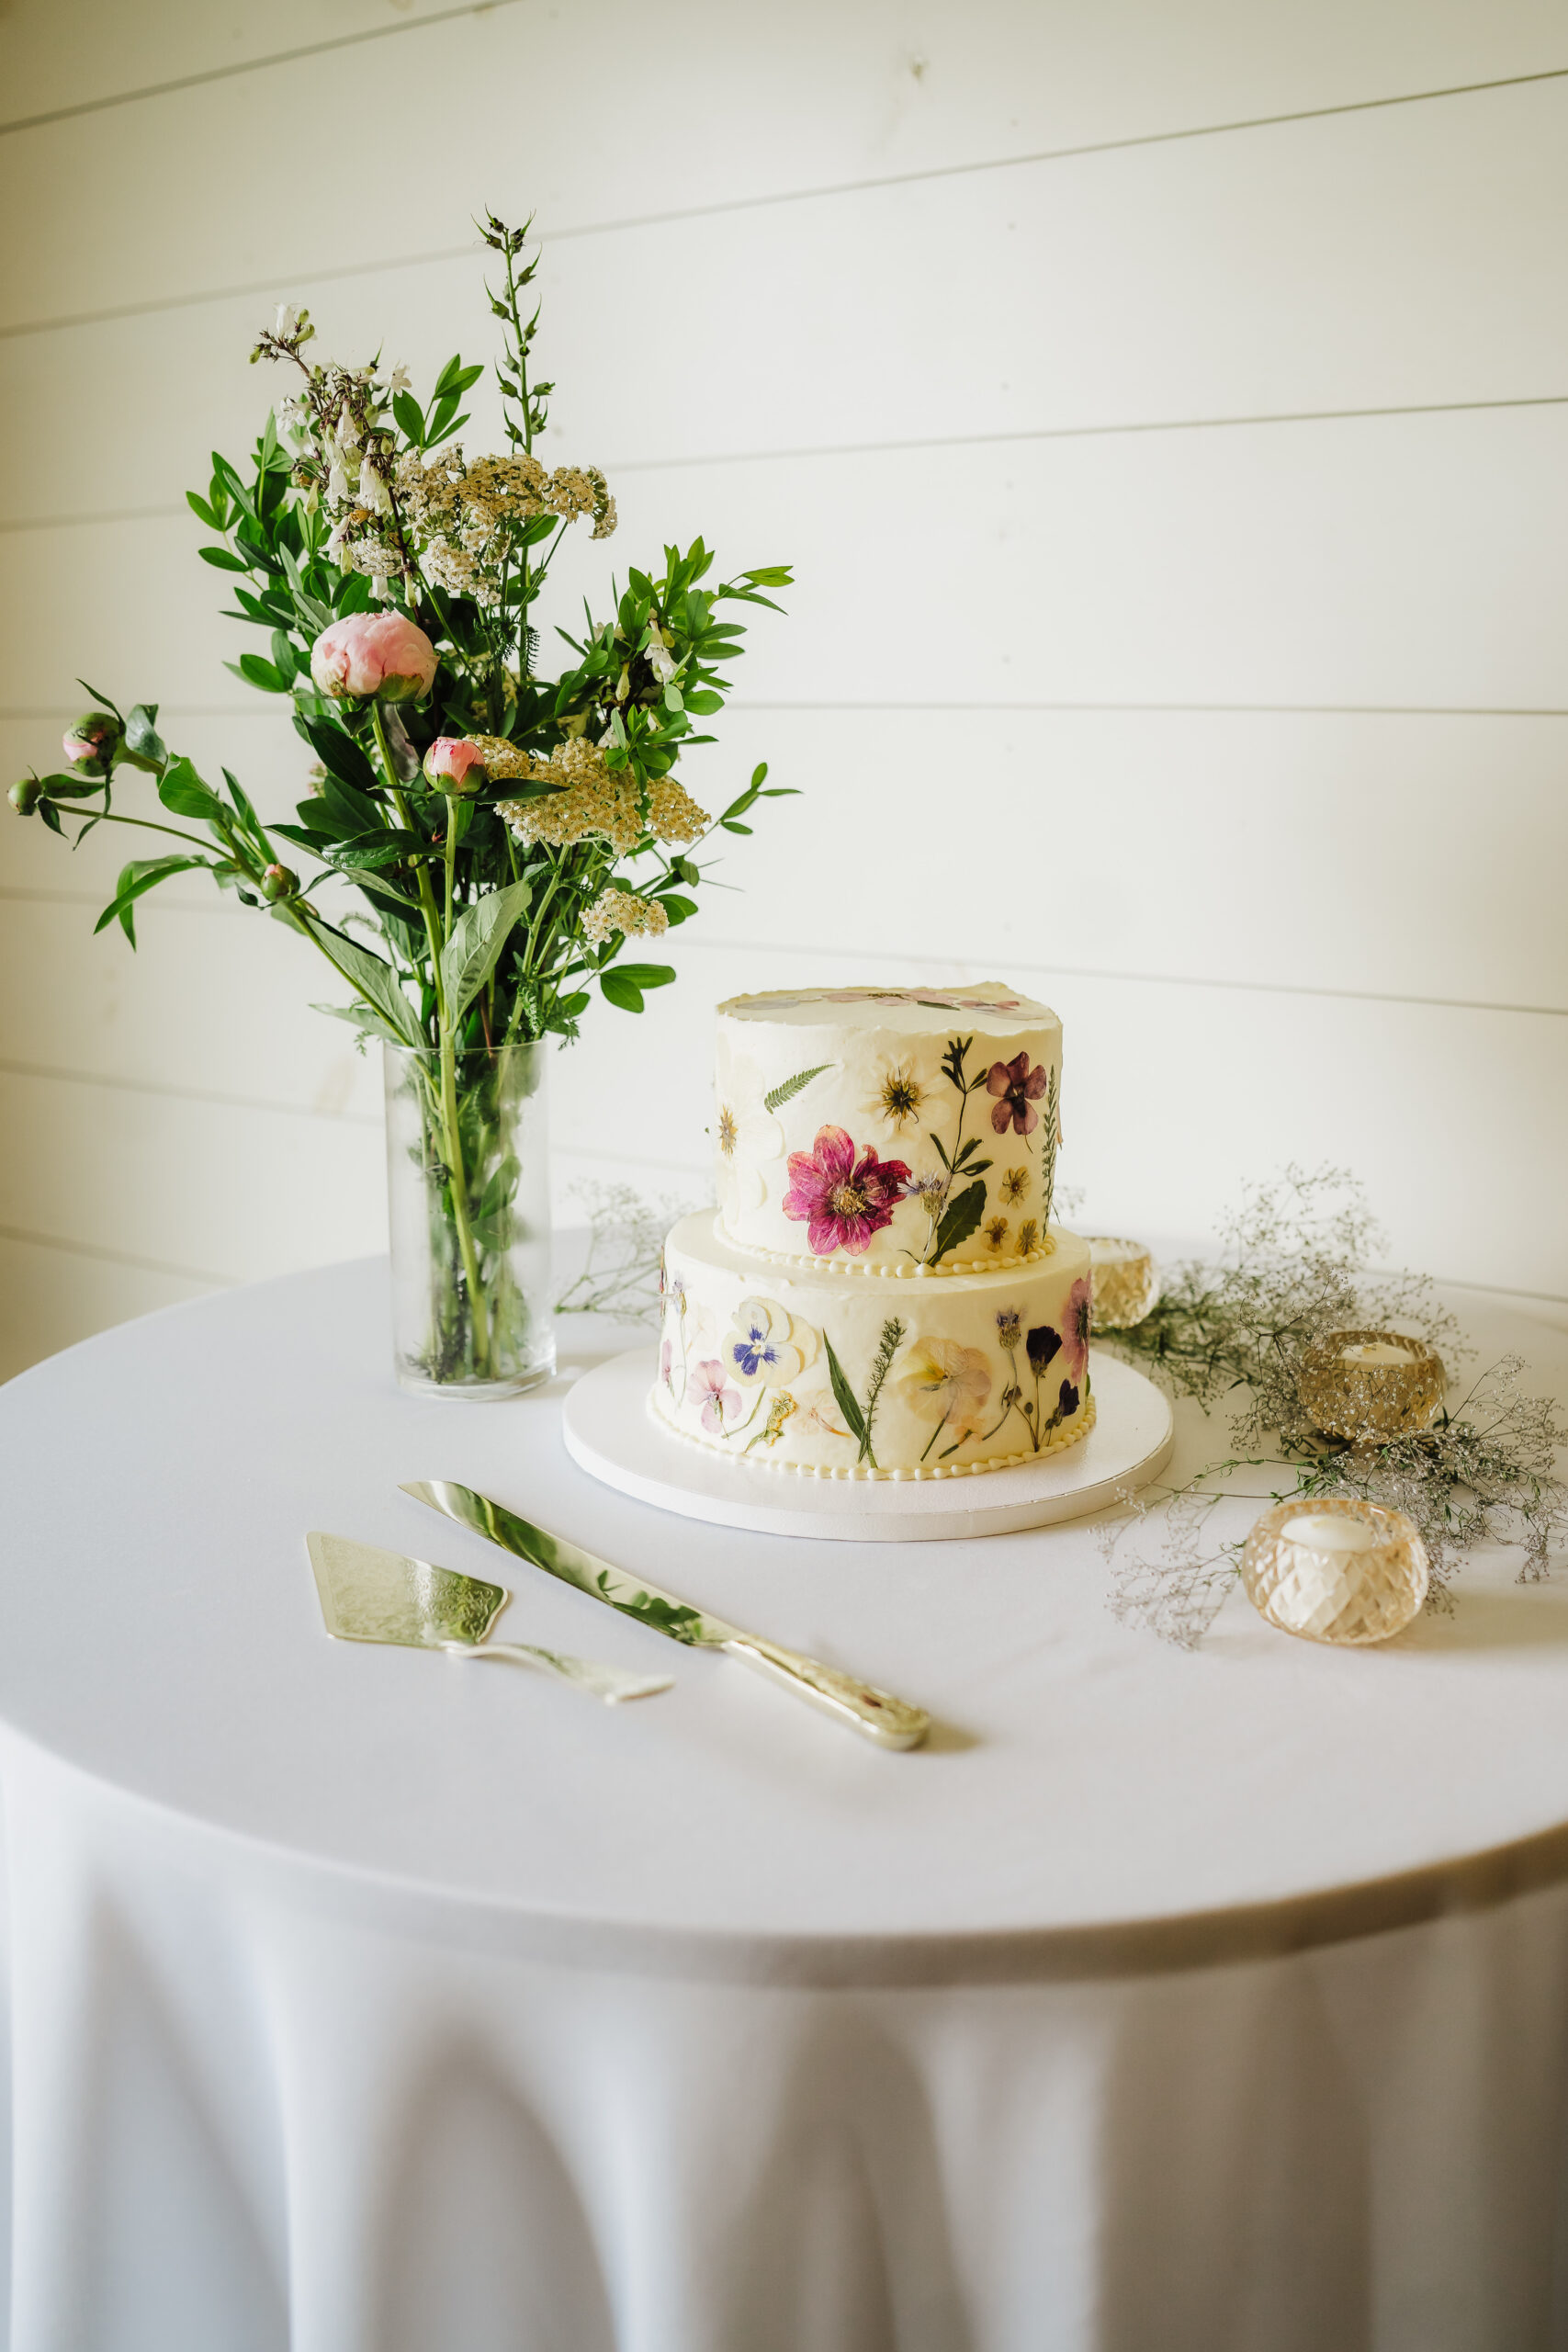 A beautiful floral wedding cake is frosted with colorful icing flowers on the reception cake table. Wedding cake inspo Floral wedding cake Small wedding cake#weddinginspiration #weddingplanning #diywedding #wisconsinweddingphotographer #armywedding
